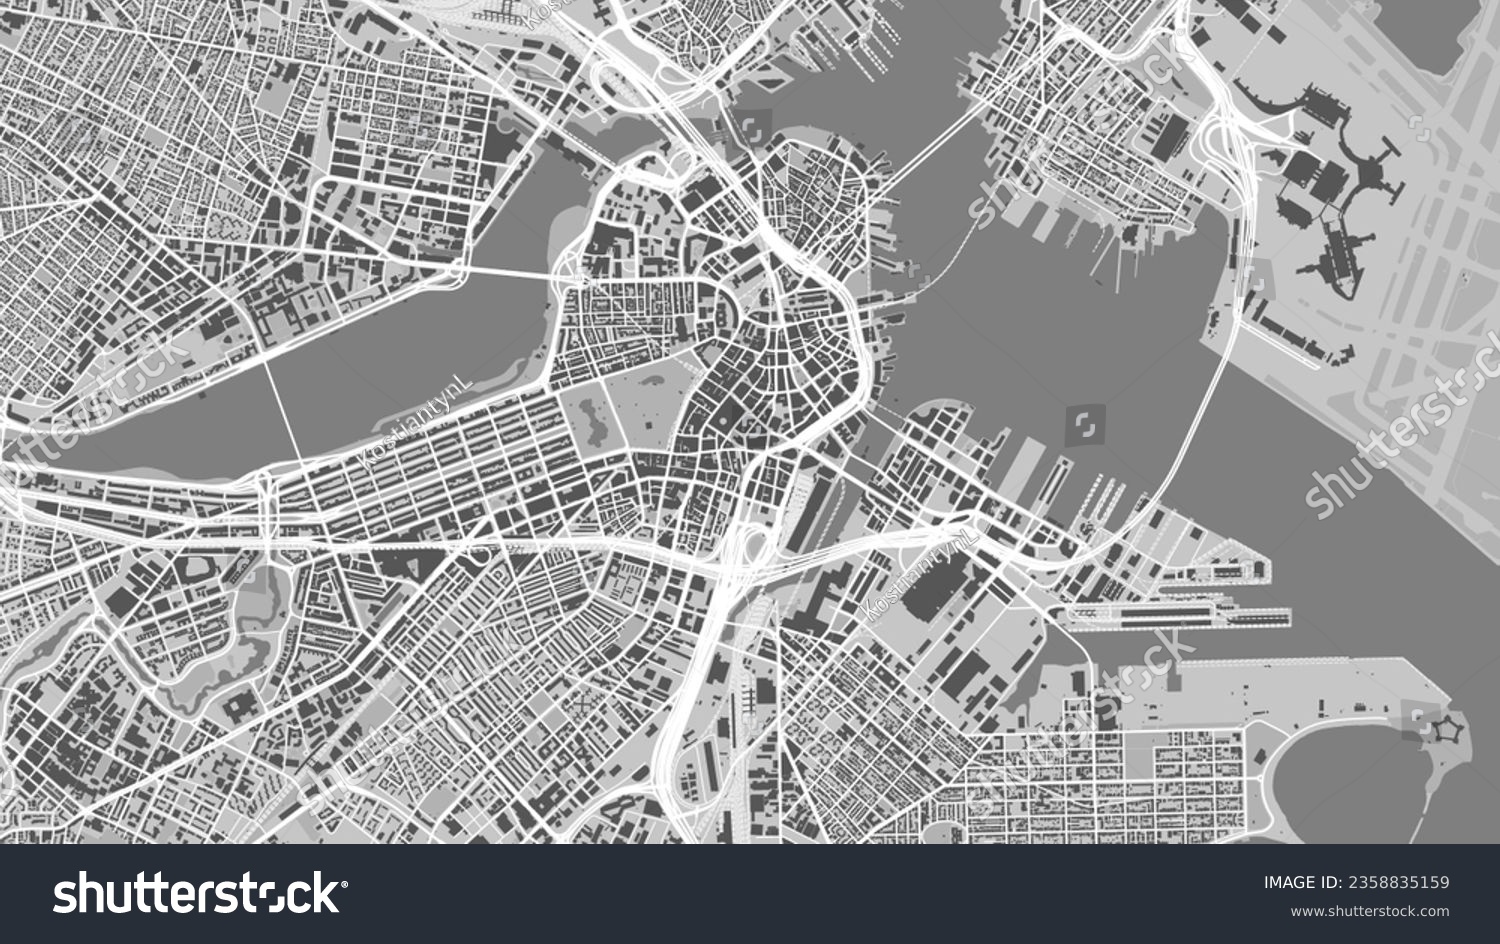 SVG of Map of Boston city, United States. Urban black and white poster. Road map image with metropolitan city area view. svg